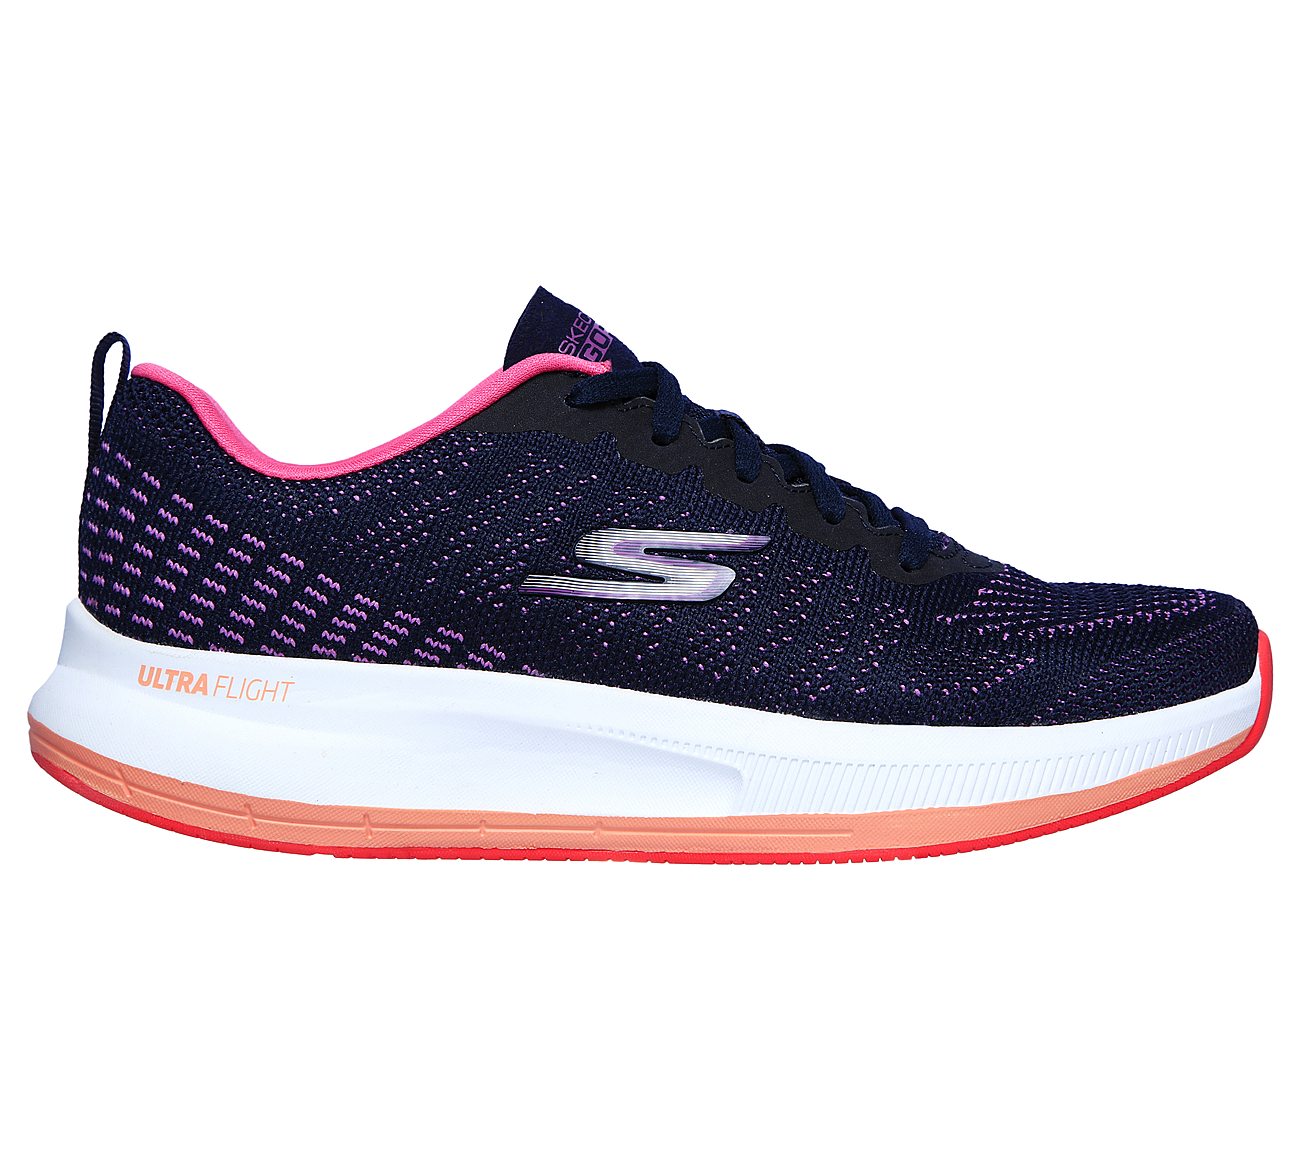 best place to buy skechers